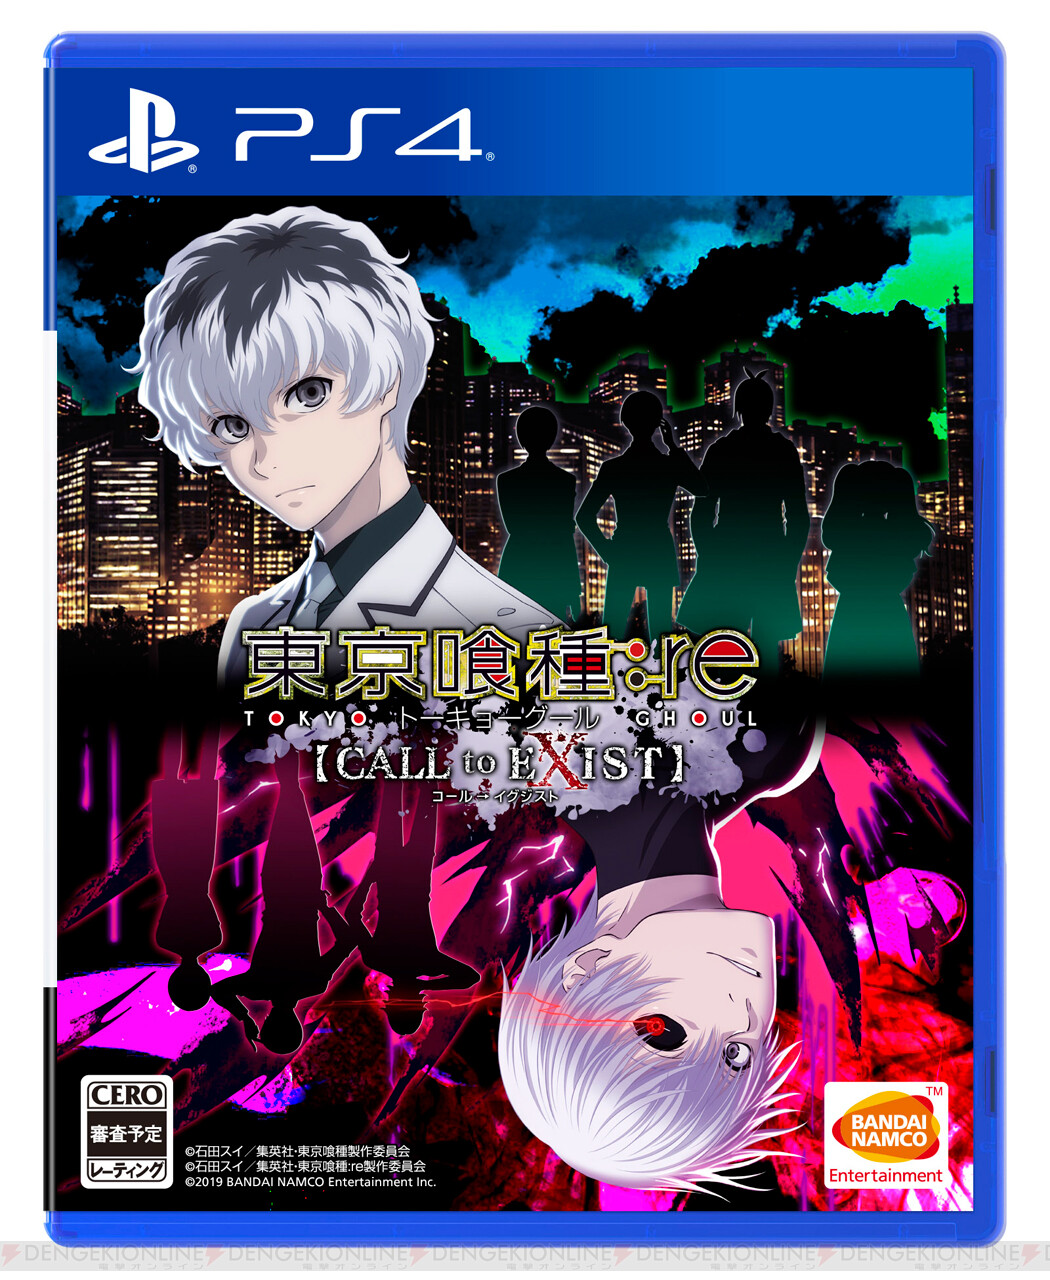 Ps4 東京喰種 Re Call To Exist の発売日が11月14日に決定 電撃オンライン